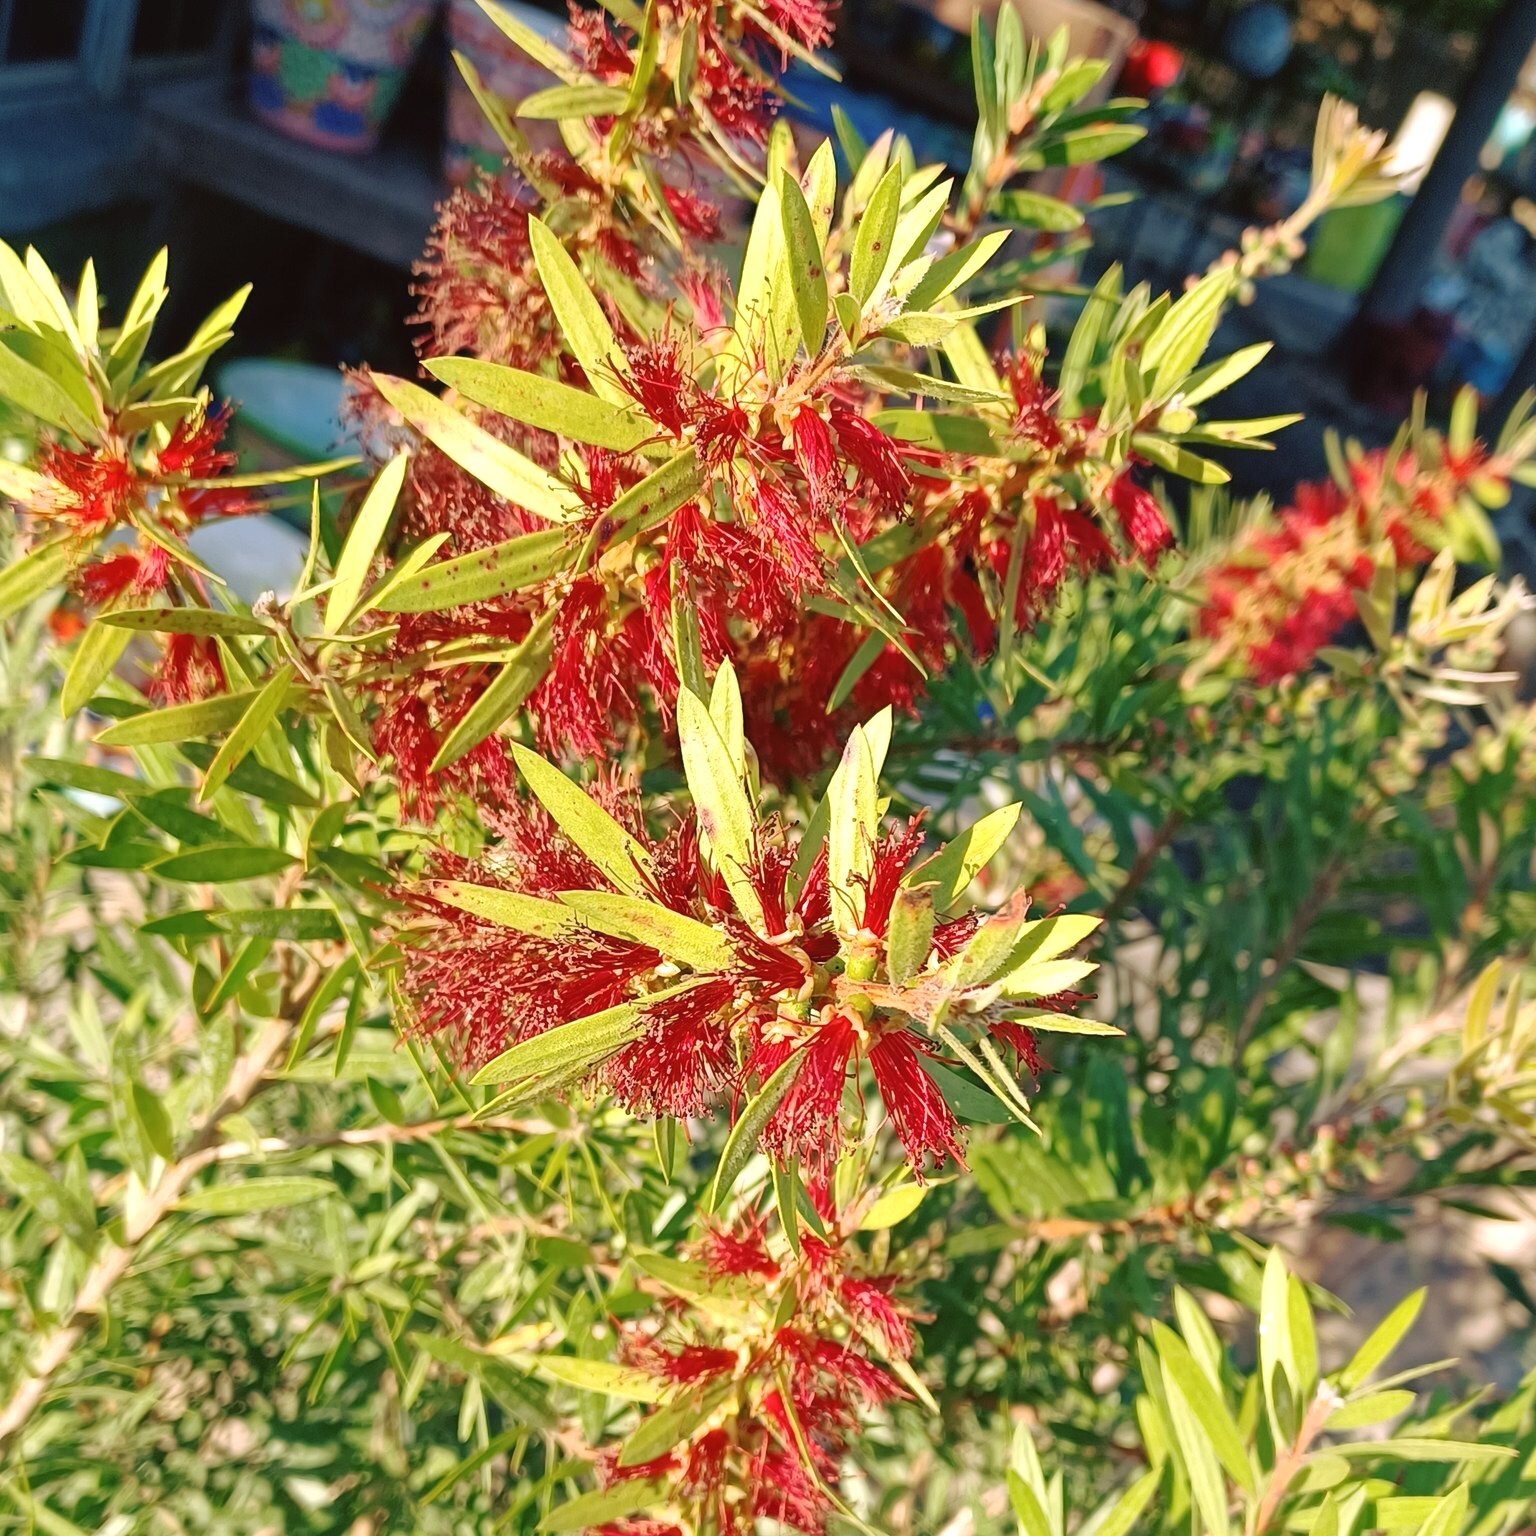 Swing by the Nursery and plant a tree for the Earth on Earth Day! 🌳🌳🌳
Check out our beautiful selection of trees, from verdant Bottlebrush shrubs to Sago palms, we have everything you need to get you start up a whole forest~
Visit our website at t